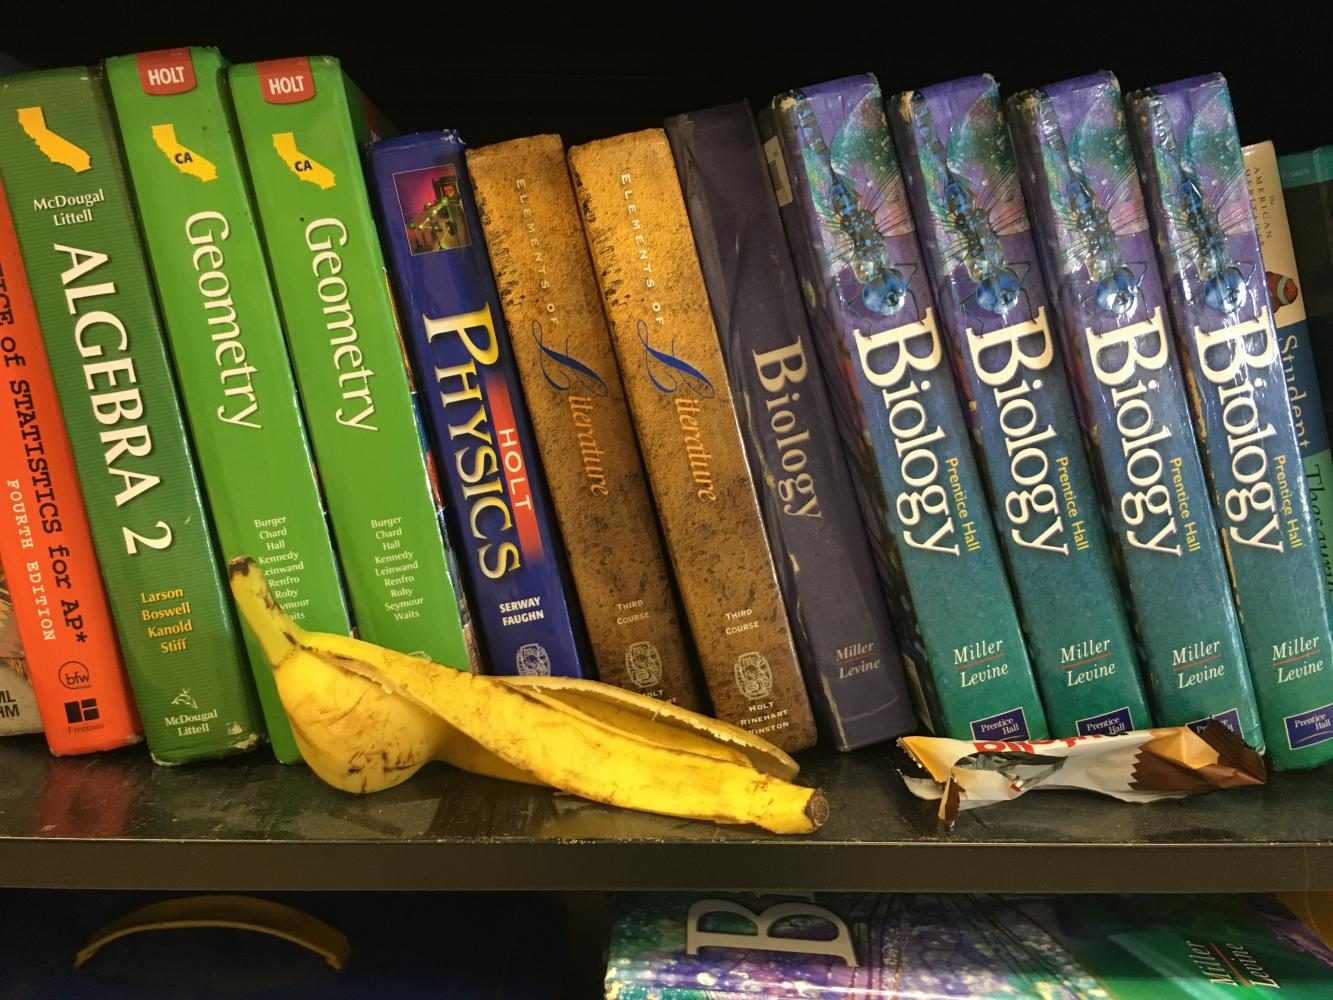 A half-eaten rotten banana is among one of the many old food items librarians have found